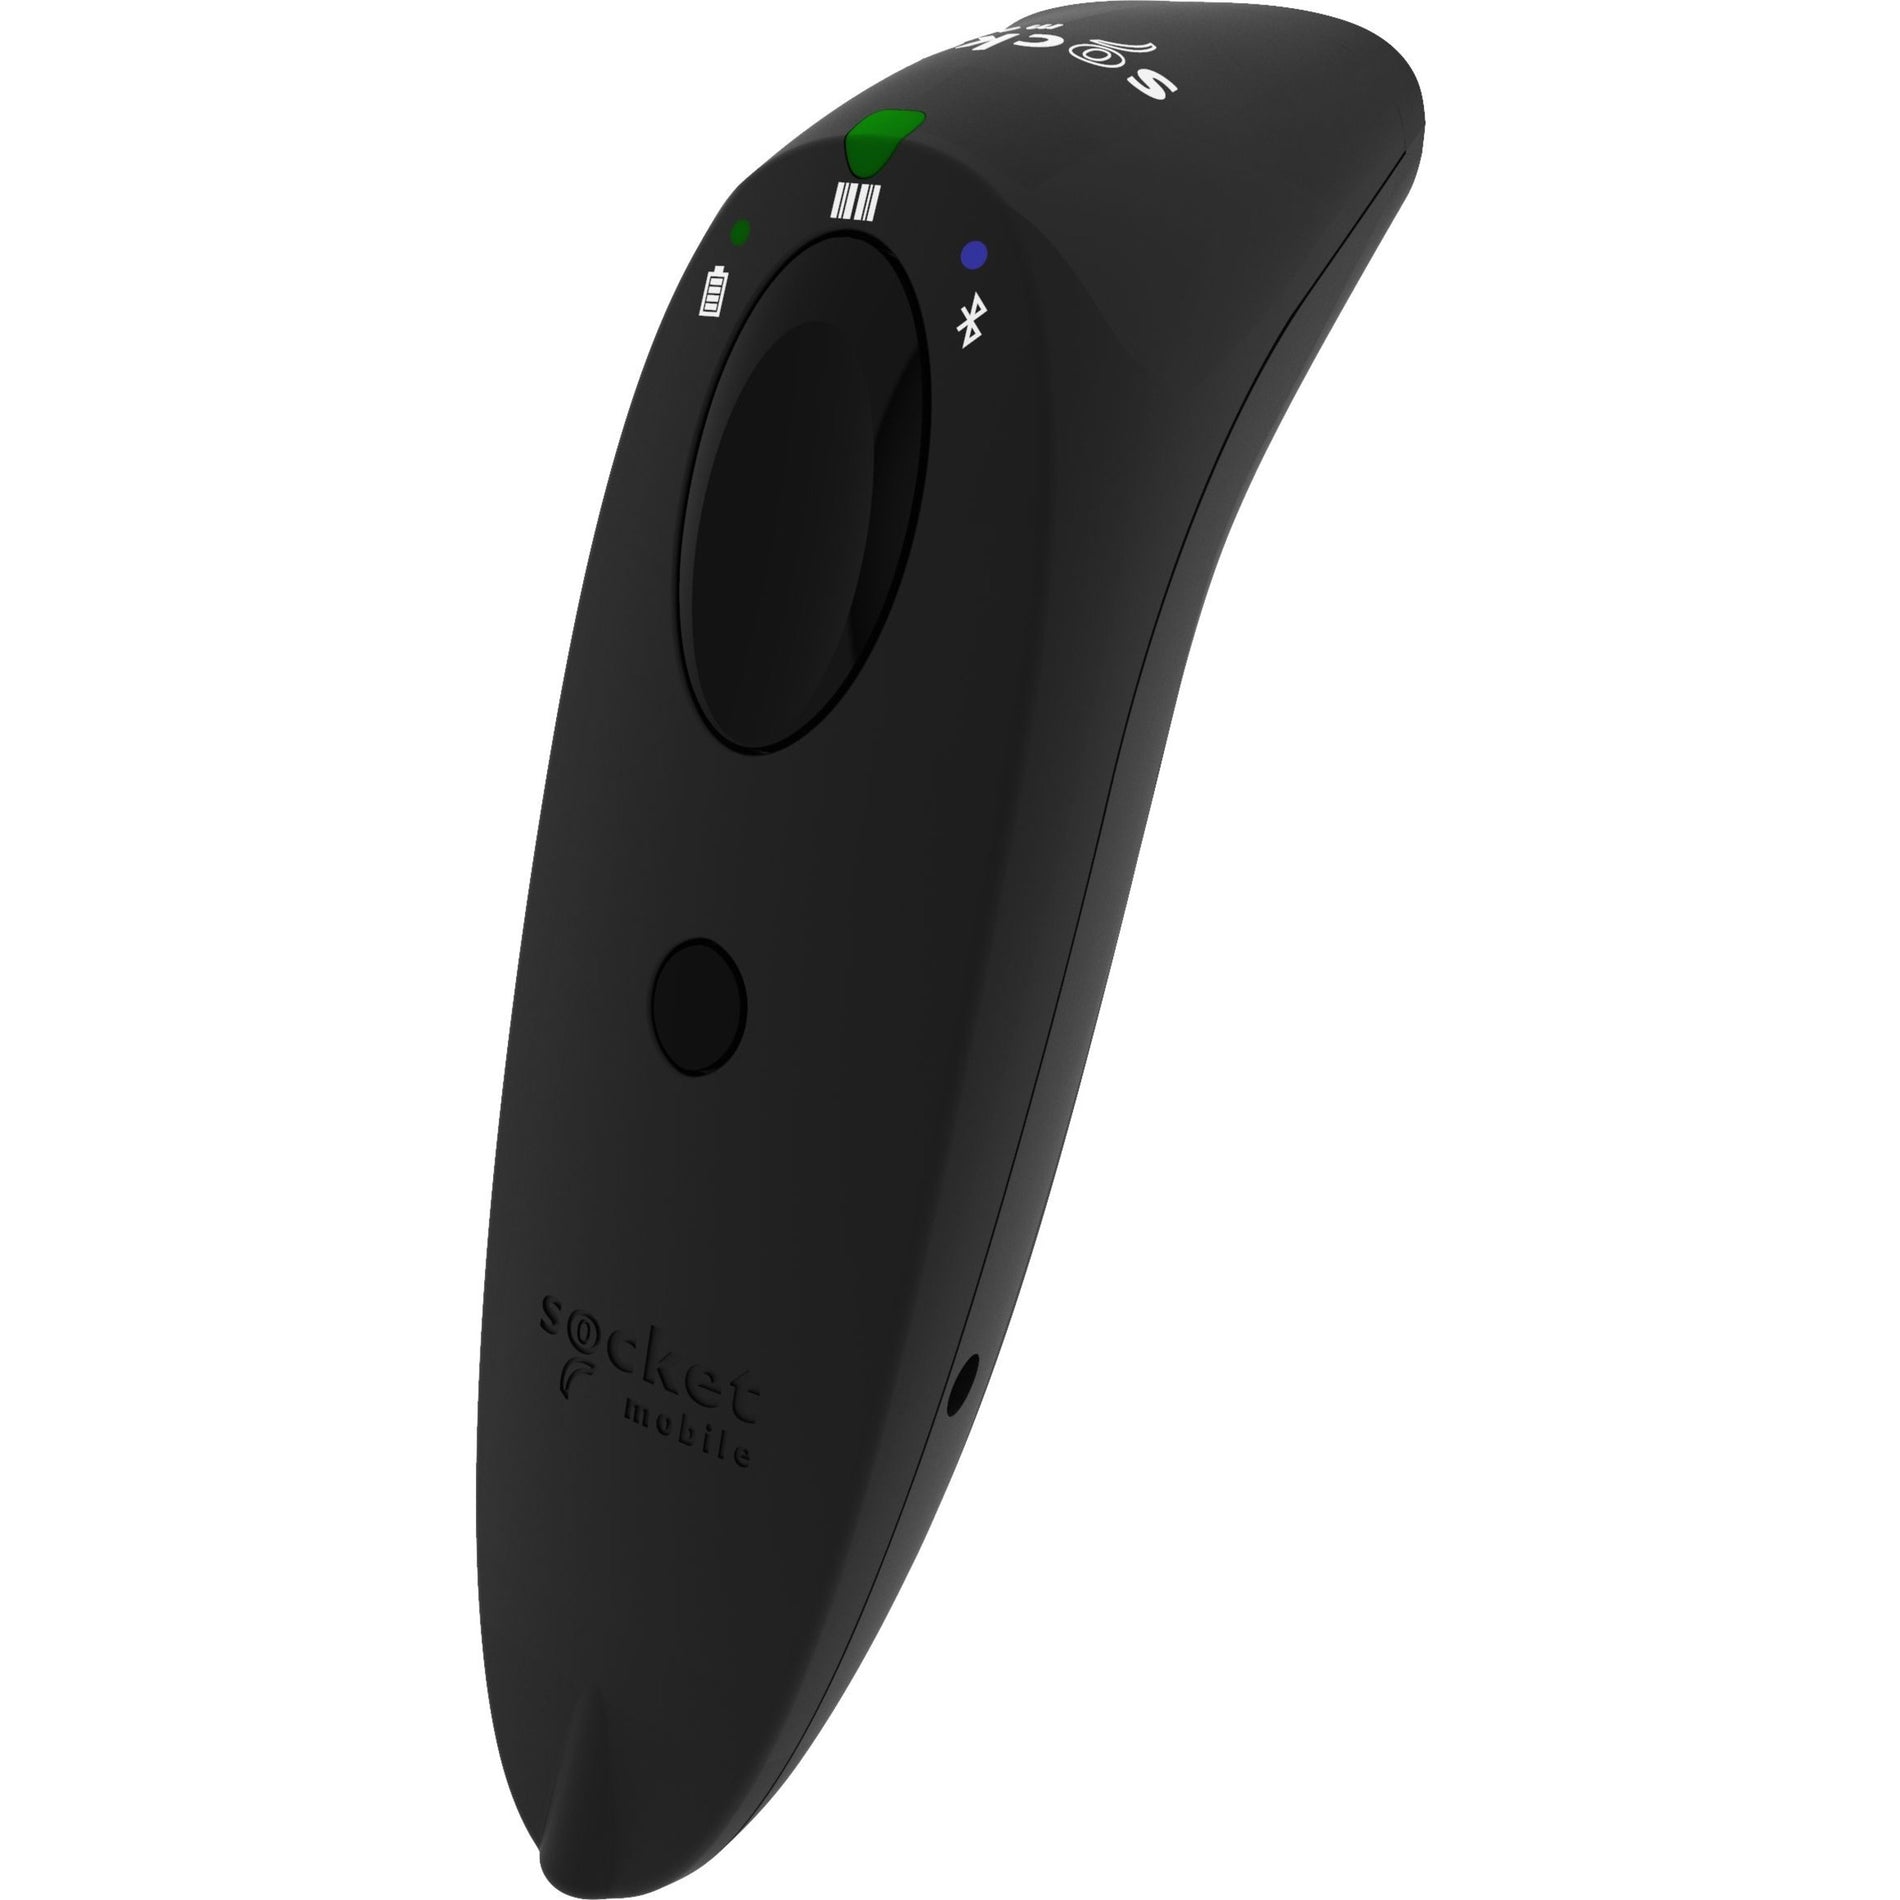 Socket Mobile CX3972-3029 SocketScan S720 Barcode Scanner, Black - Wireless, 2D and 1D Scanning, Bluetooth Connectivity